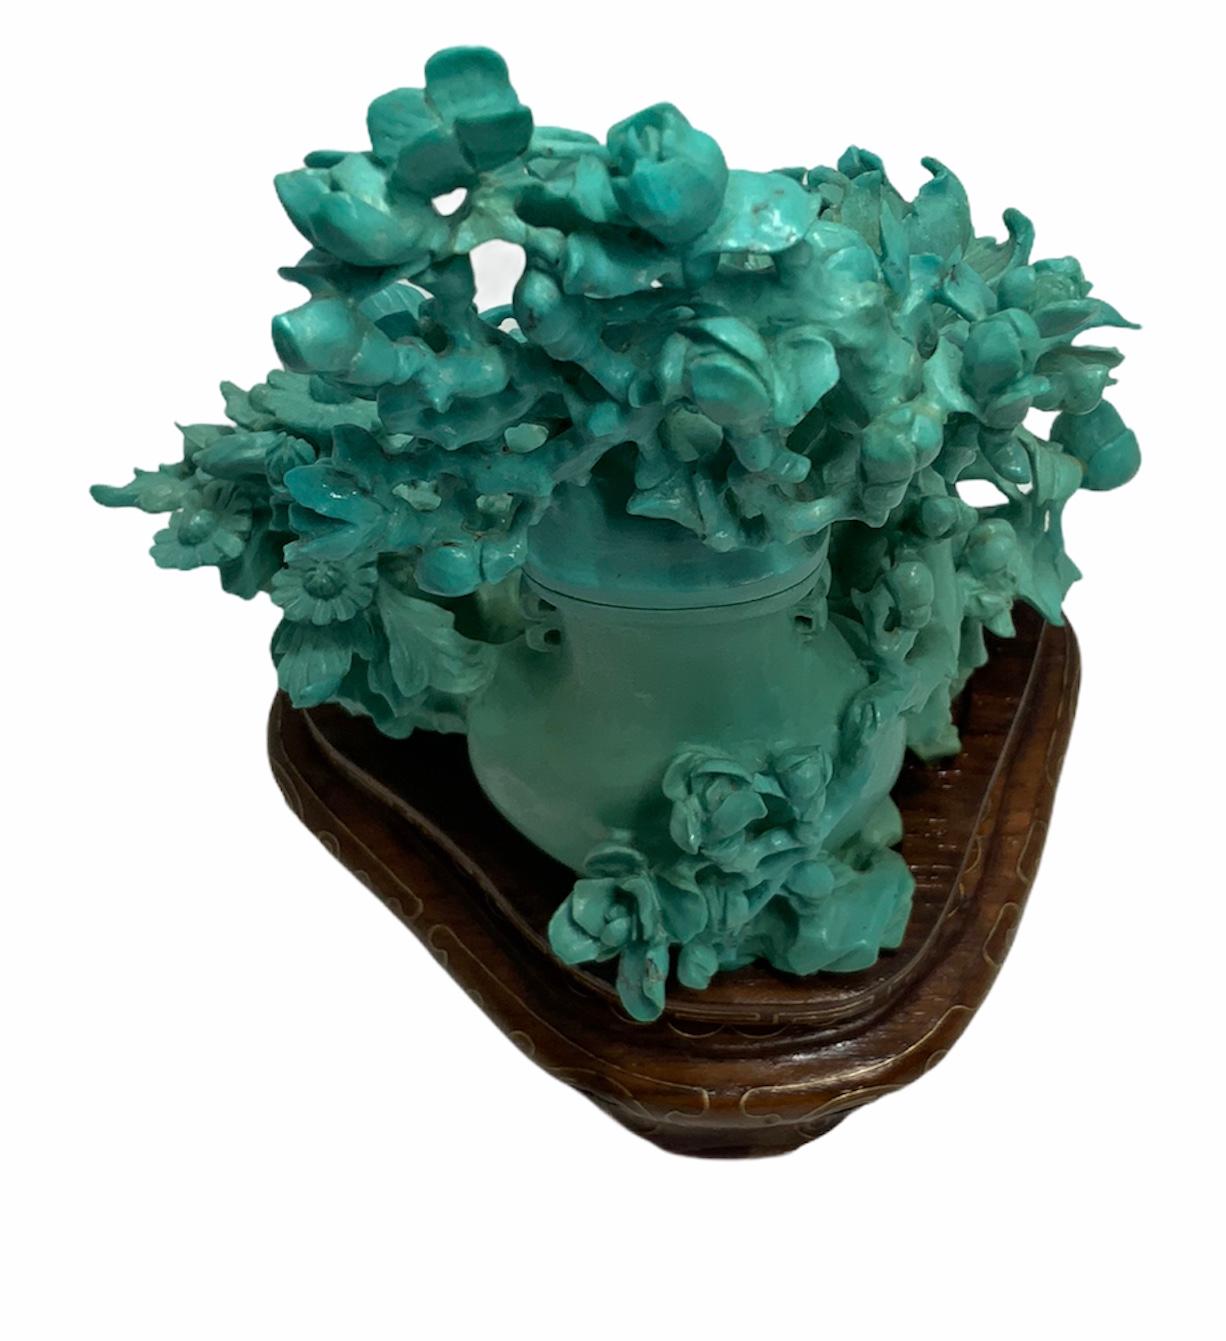 Chinese Export Chinese Carved Turquoise Vase and Flowers Table Decor